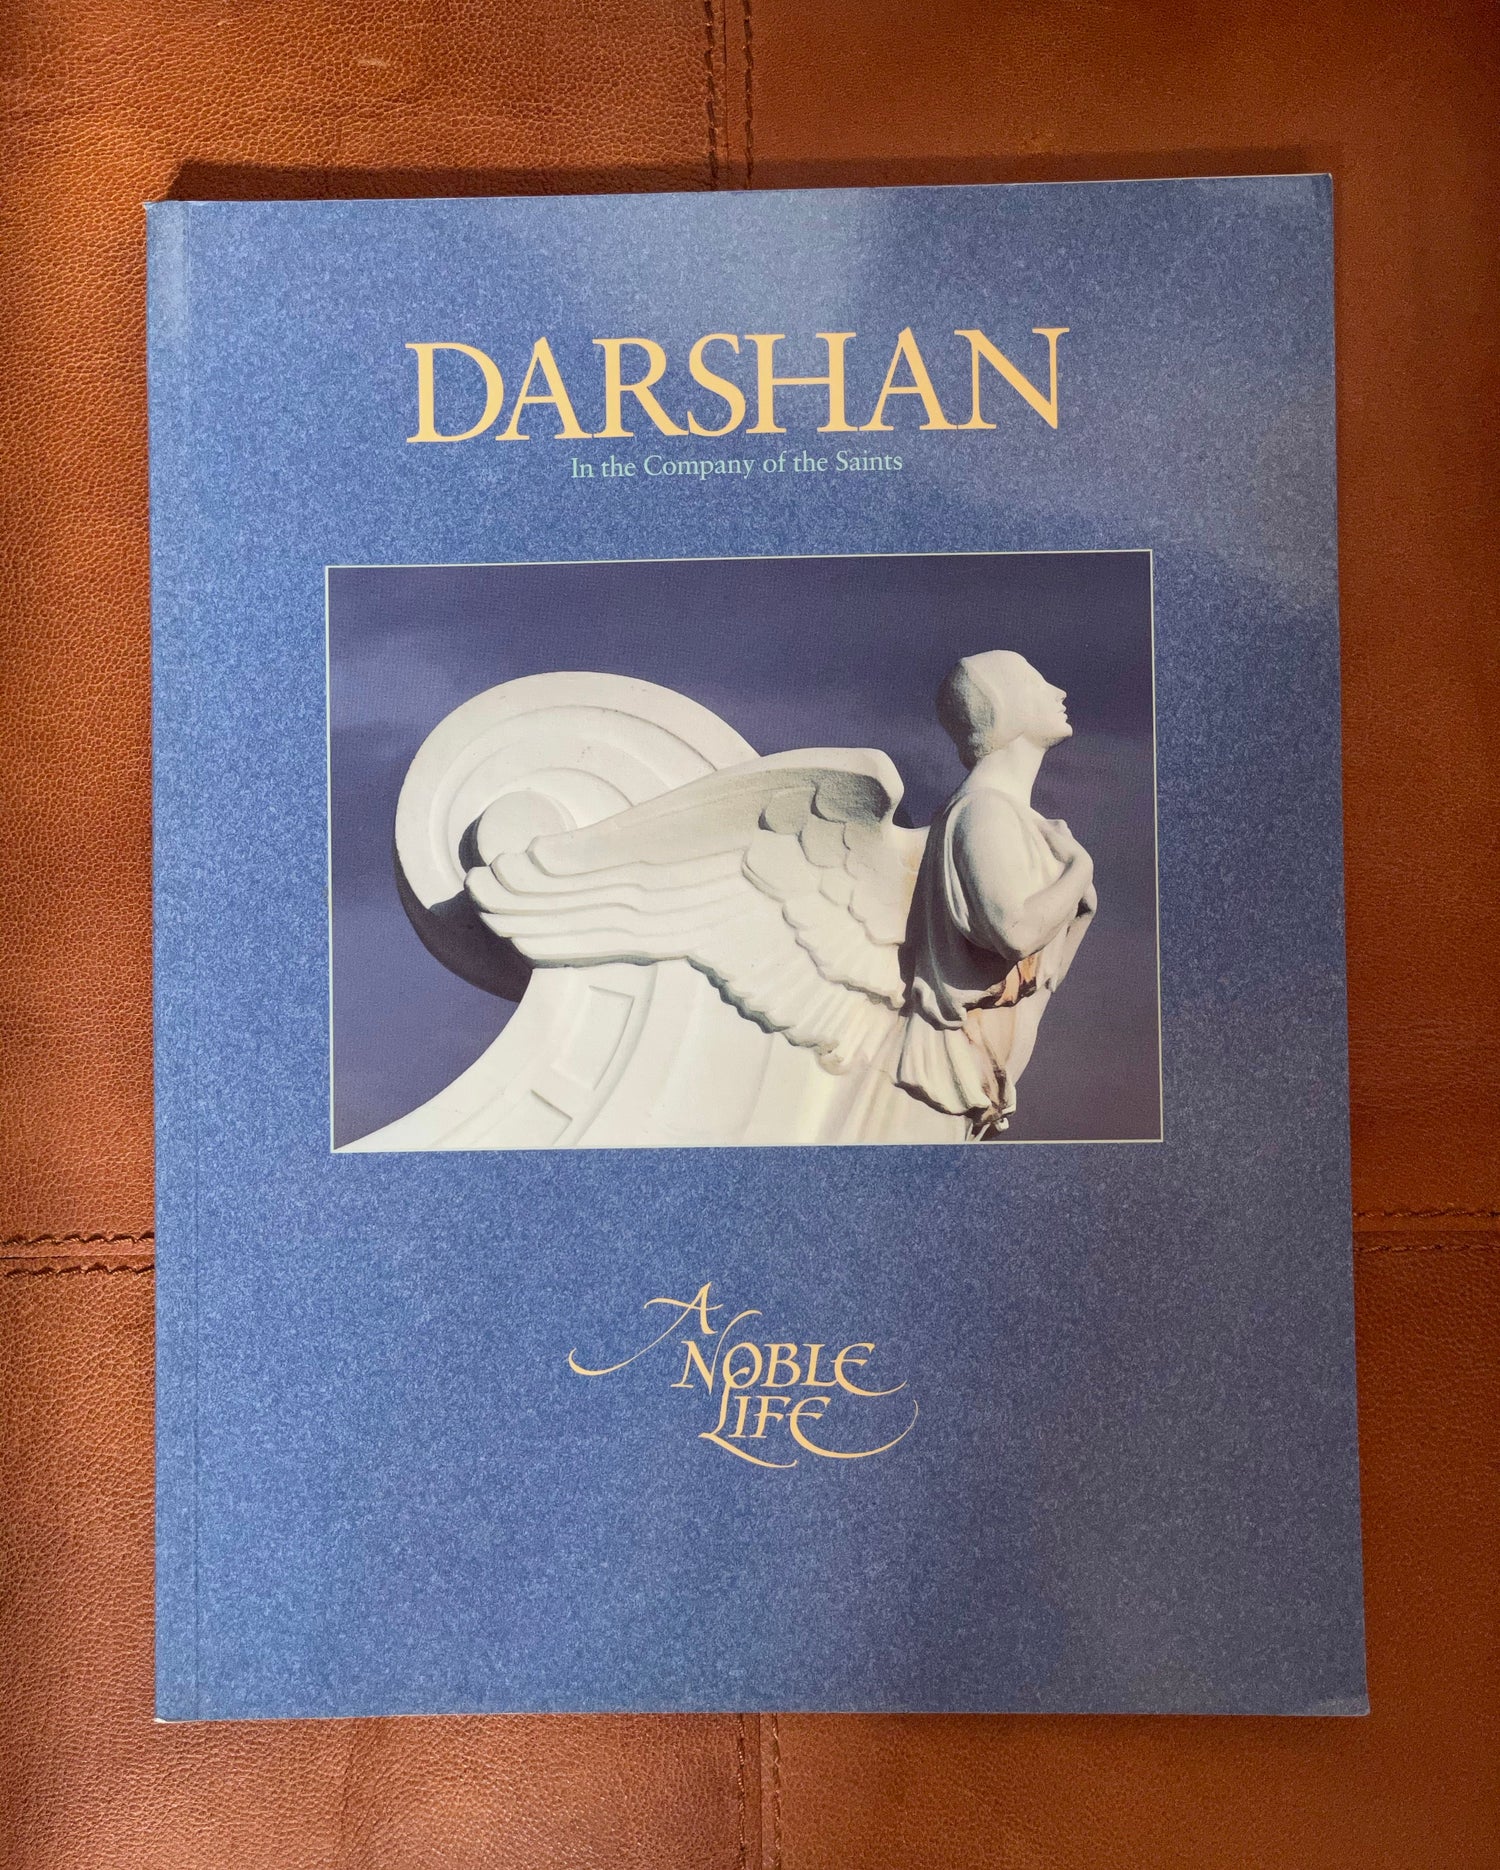 Darshan Magaizne, In the Company of The Saints, A Noble Life